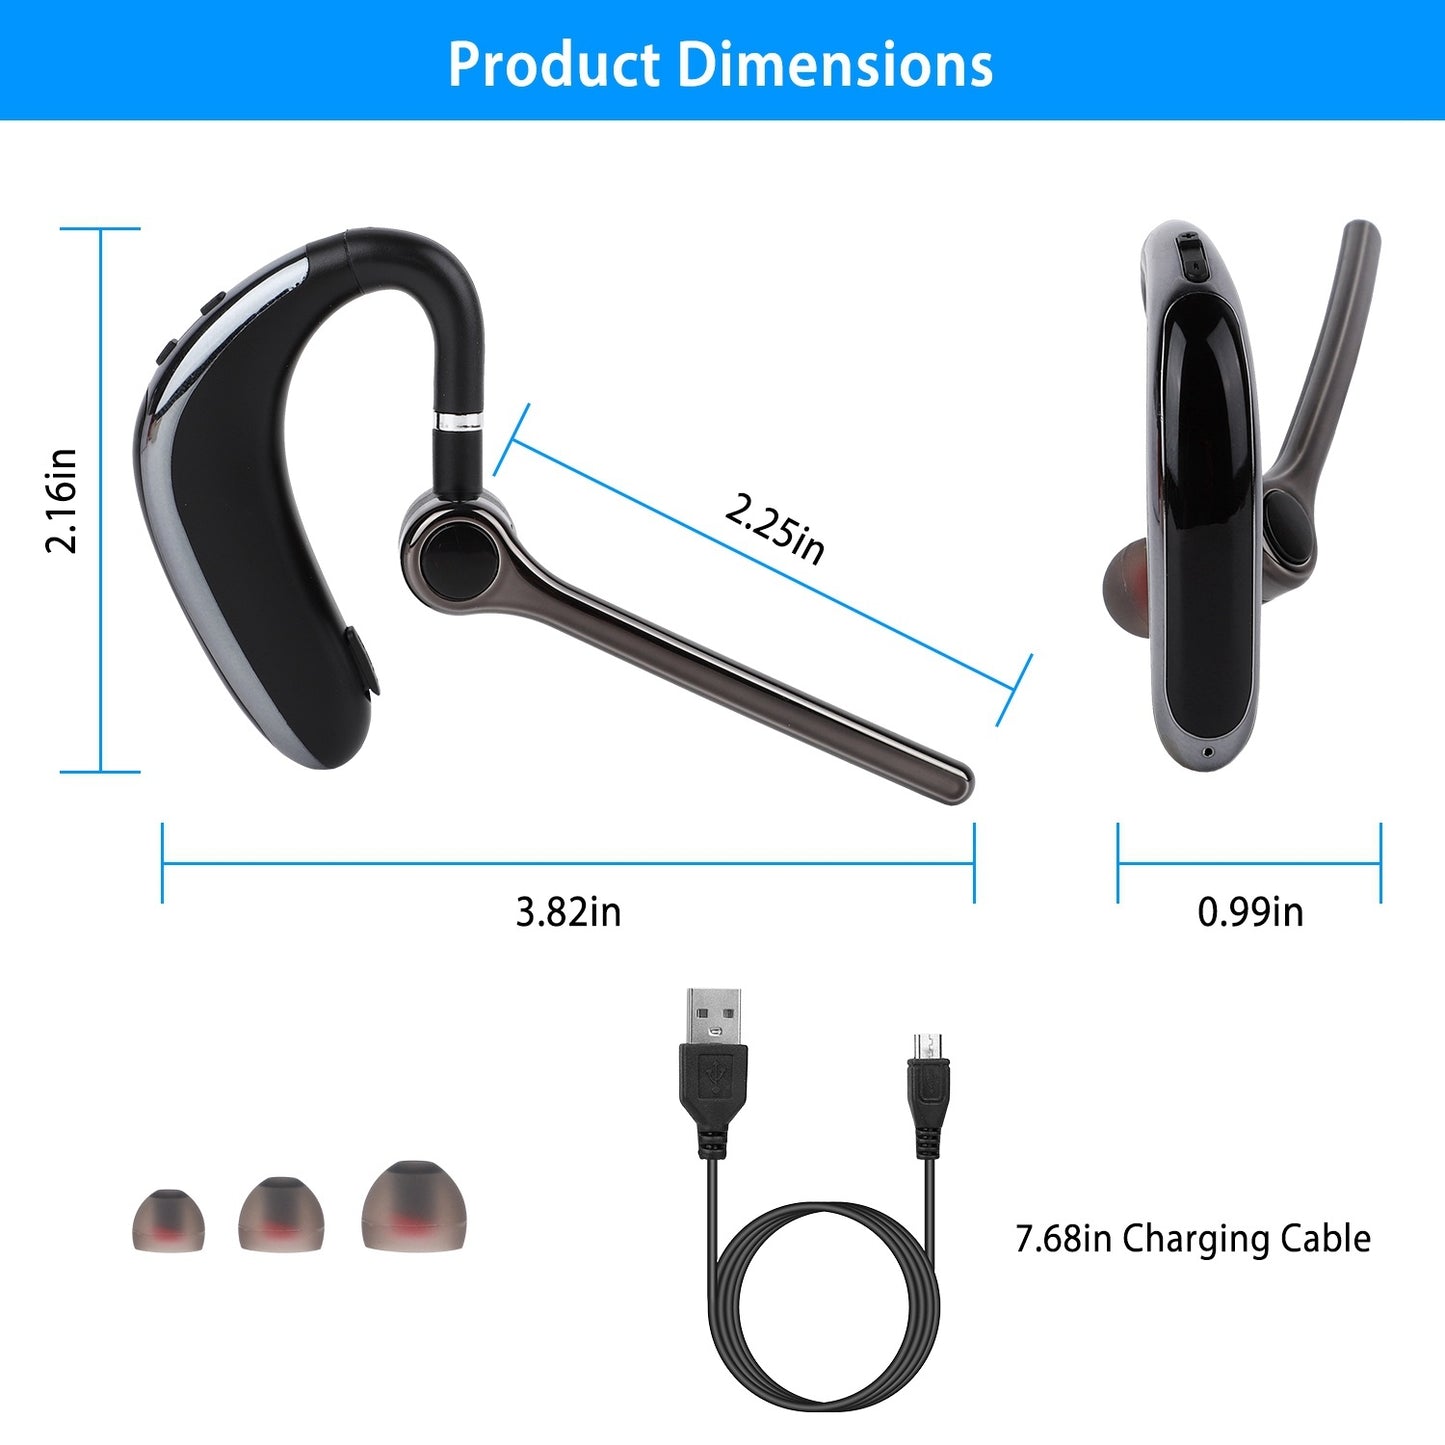 Wireless V5.0 Earpiece ENC Driving Earbuds 180° Rotatable Left Right Ear Fit Earphone For Business Driving Running